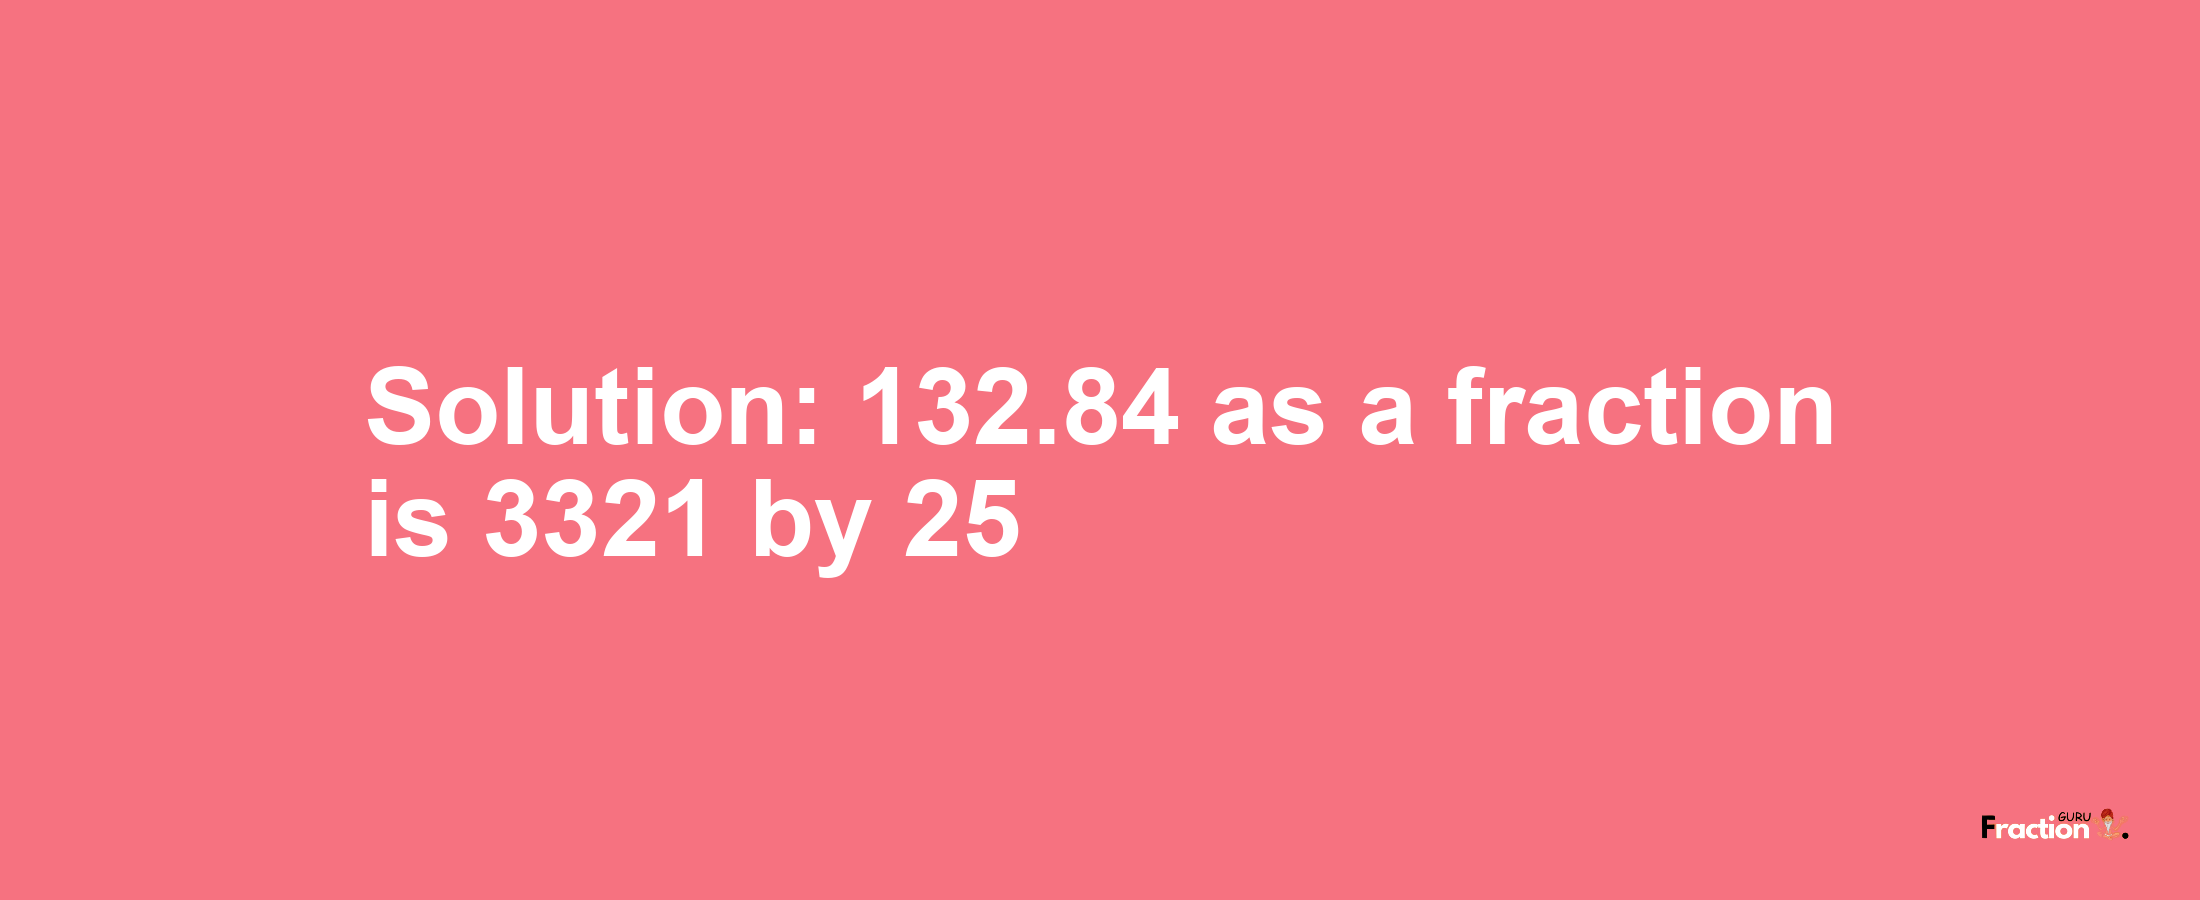 Solution:132.84 as a fraction is 3321/25